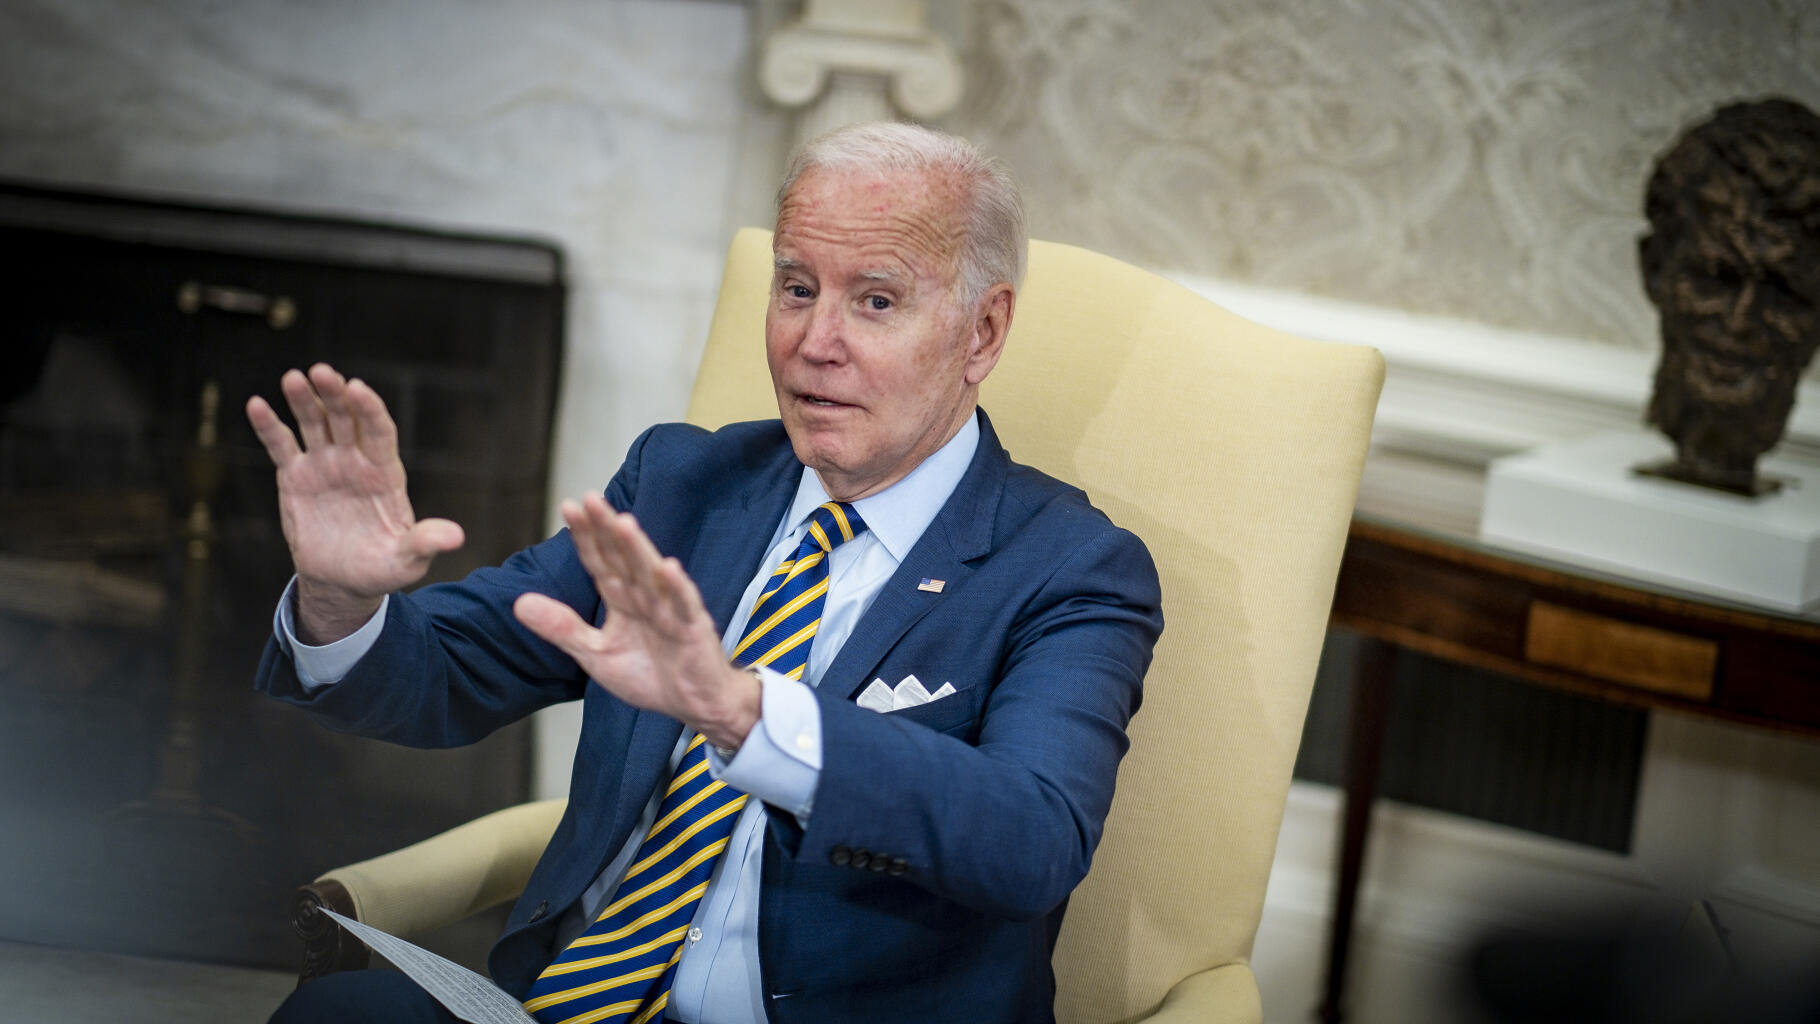 Joe Biden says the Covid-19 pandemic is “over” in the US